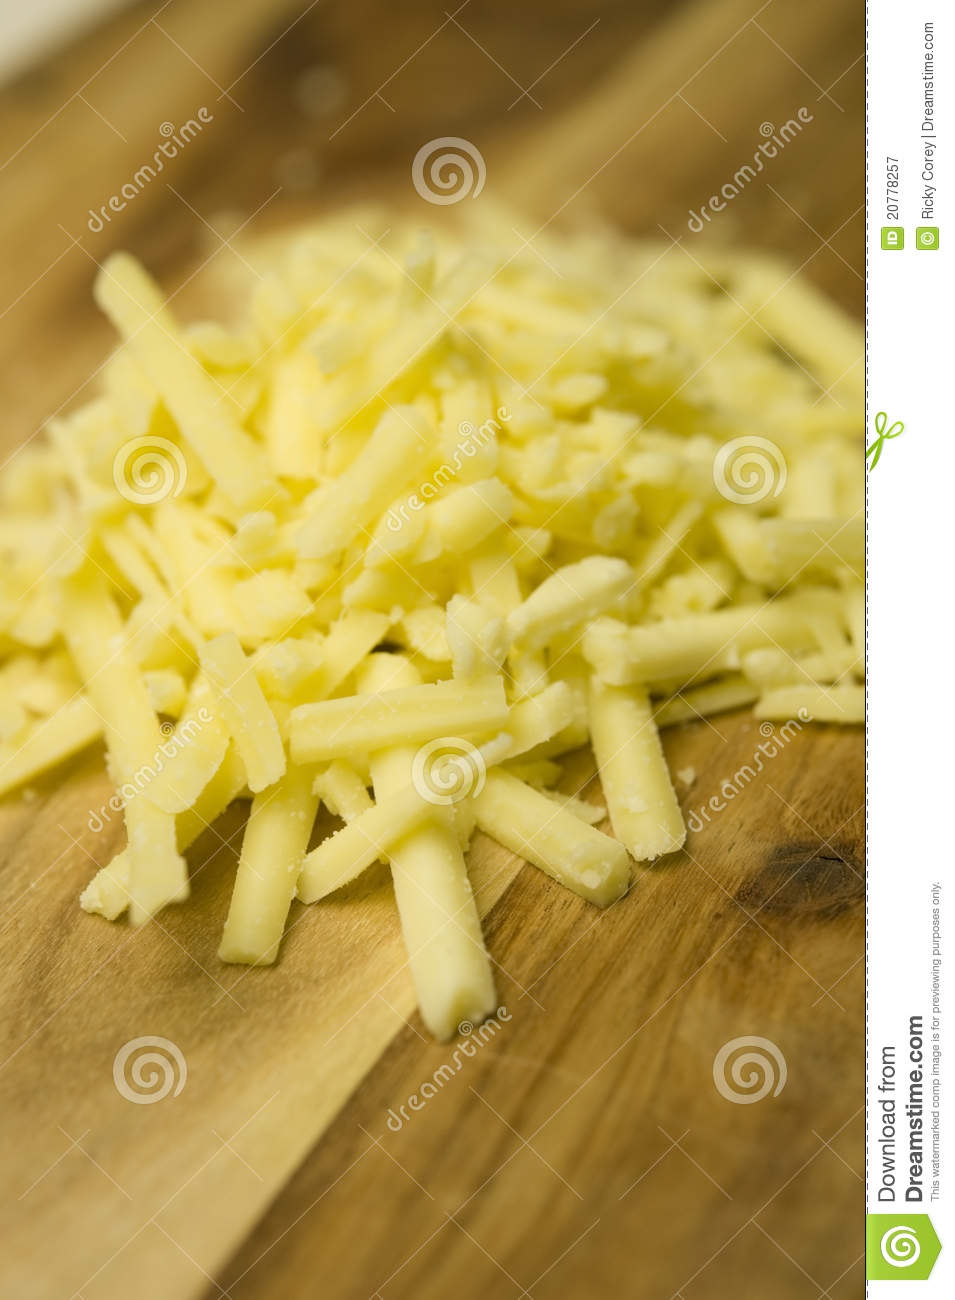 Shredded Cheese Royalty Free Stock Photography   Image  20778257